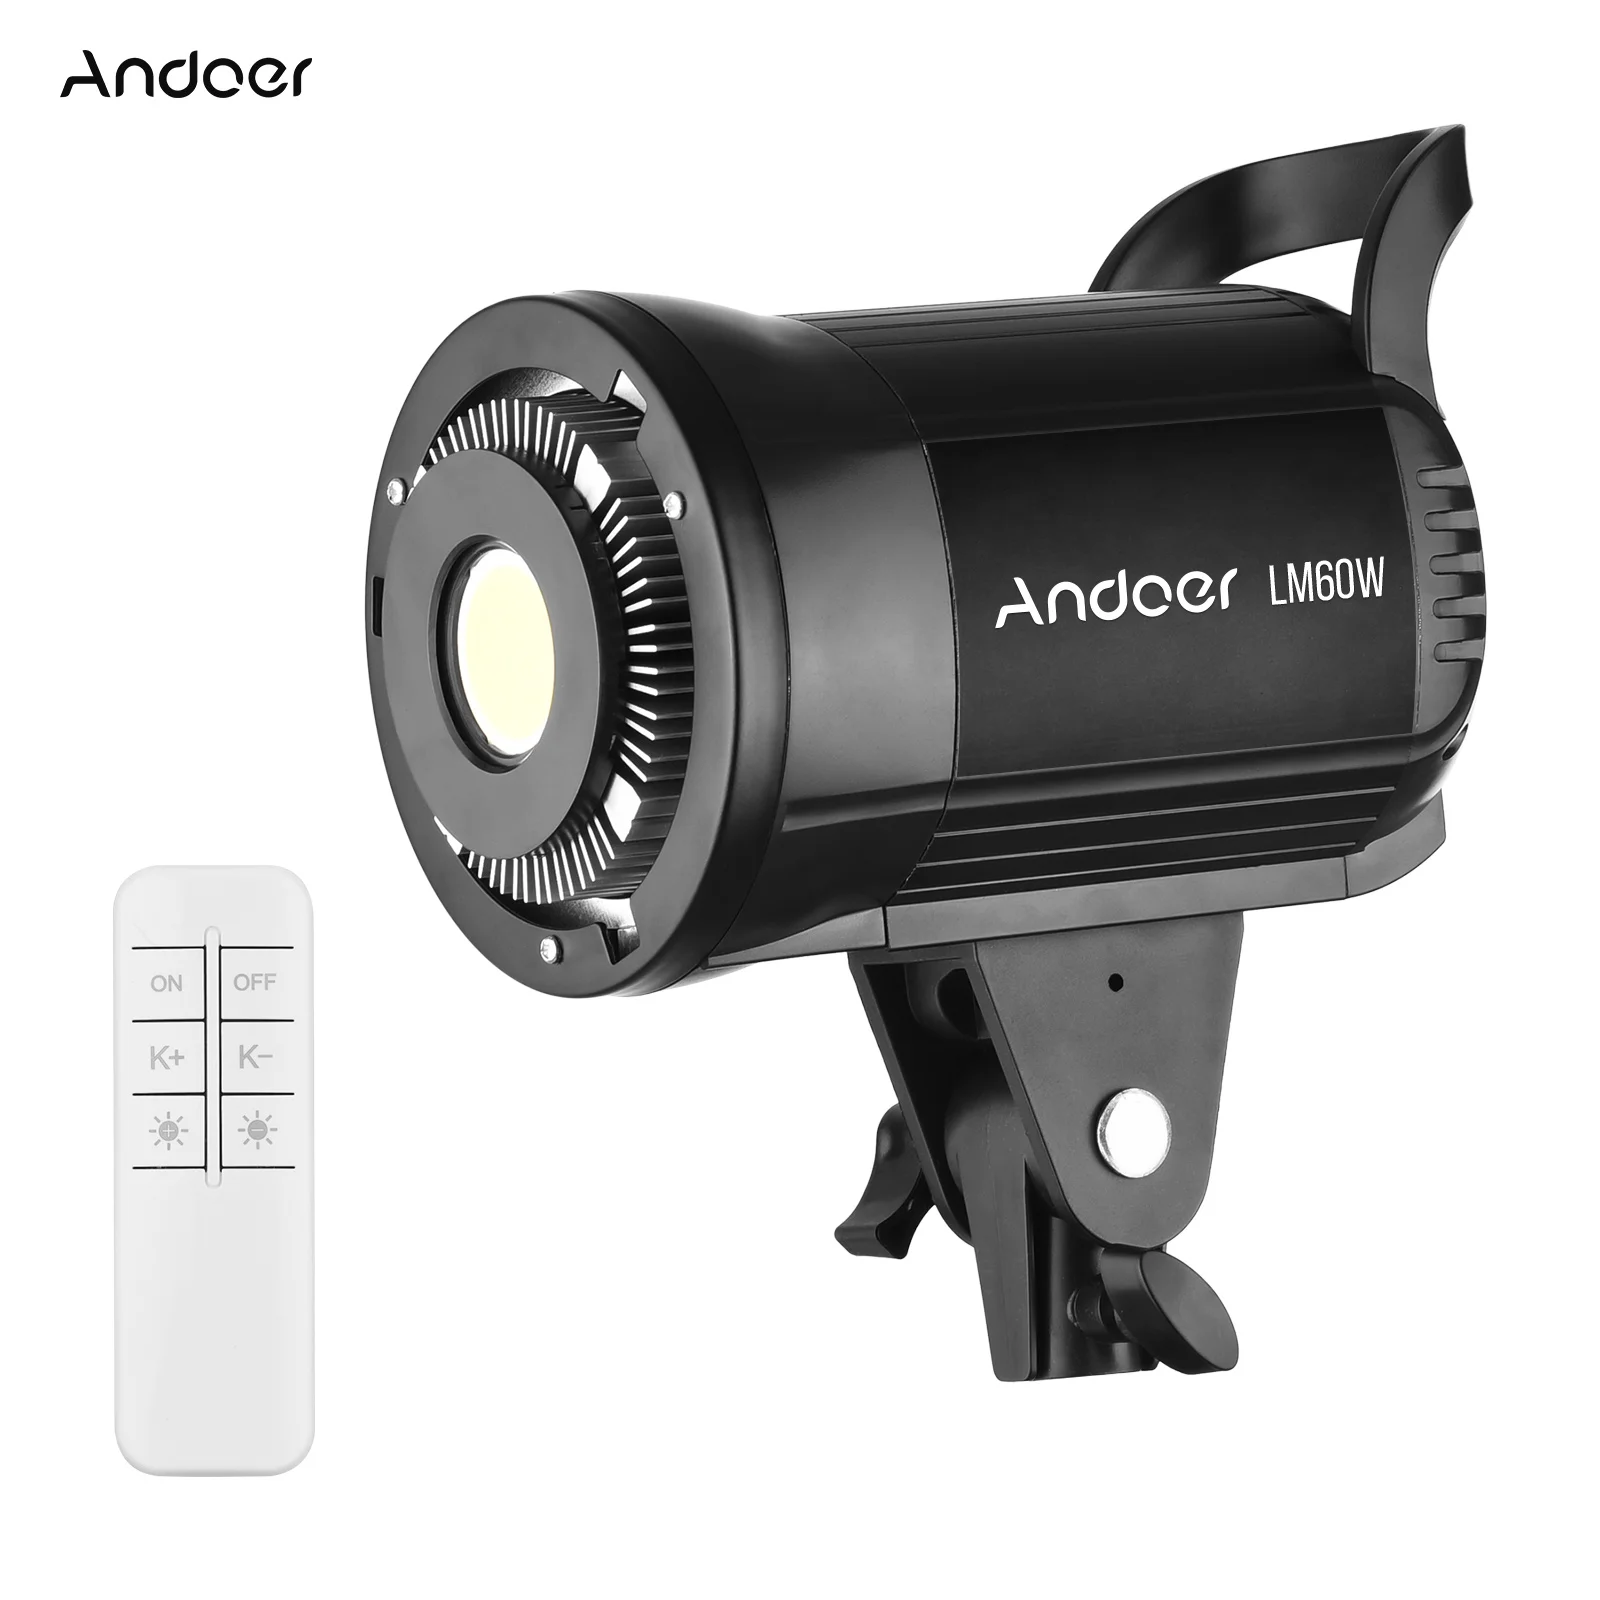 Bowens Andoer Photography Light With Bowens Reflector For Studio Photography New U0A0 